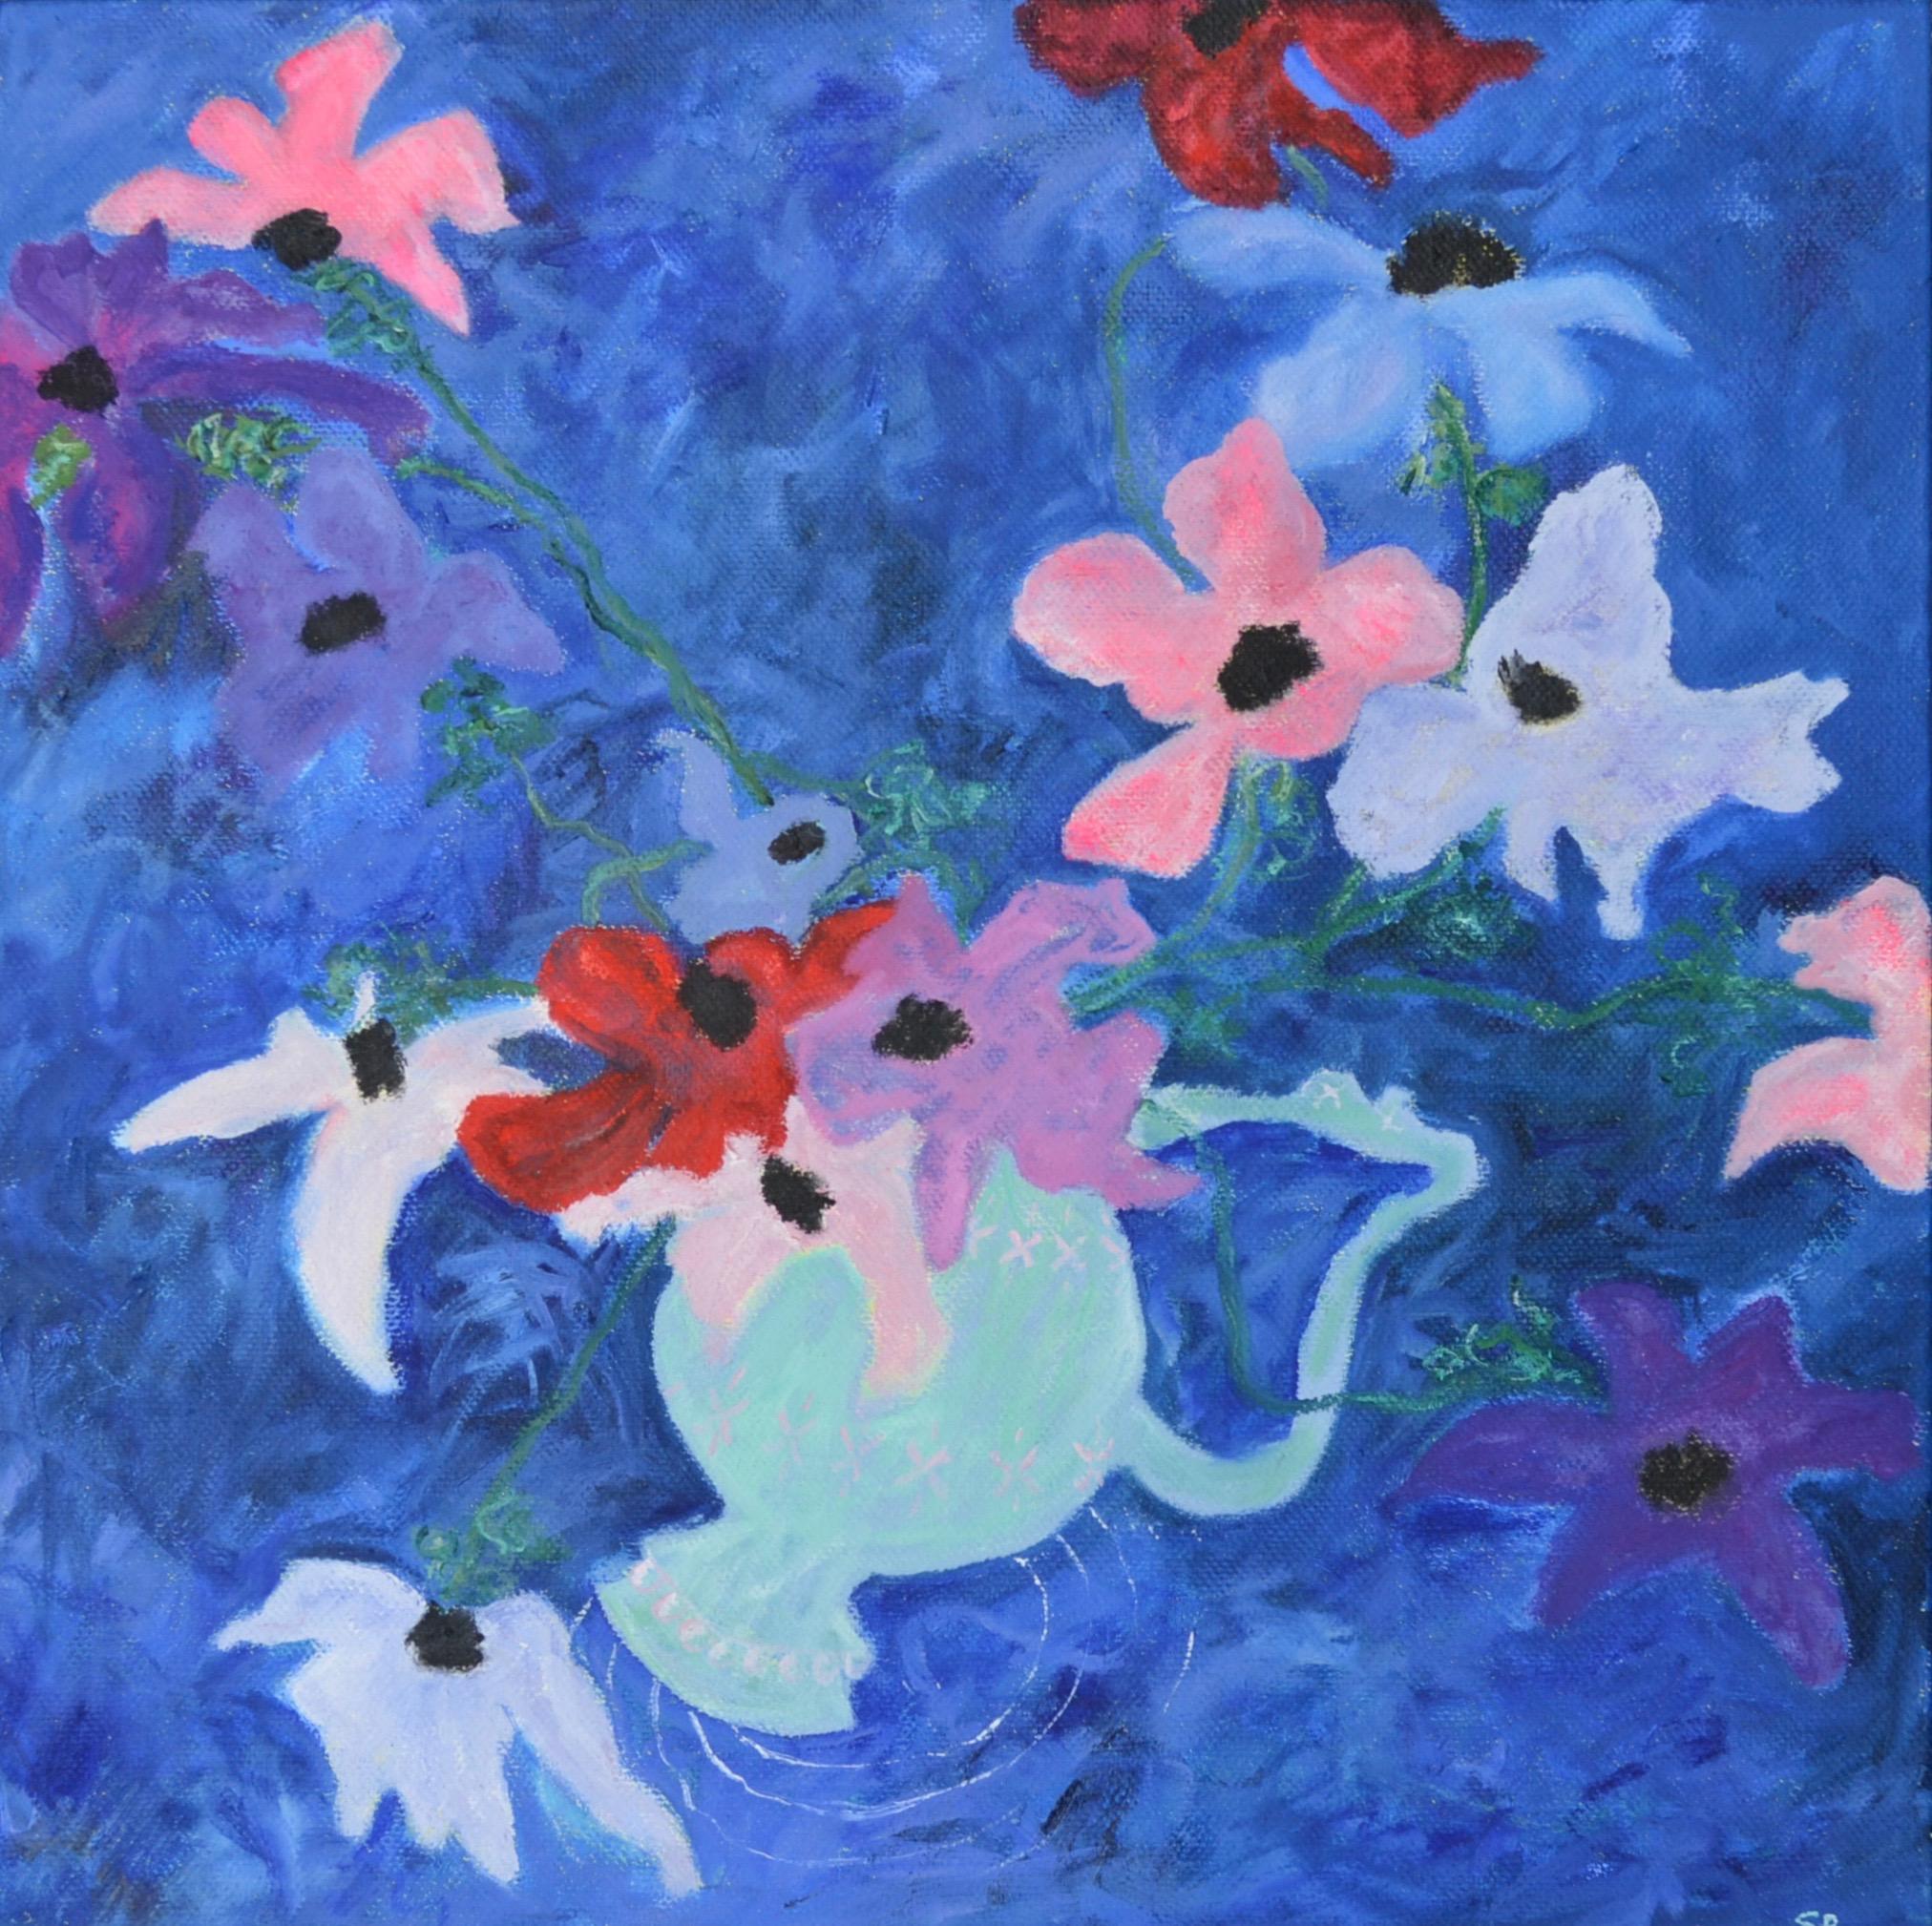 Susan Bleakley Abstract Painting - "Winter Anemones" Contemporary Abstract Expressionist Oil Painting